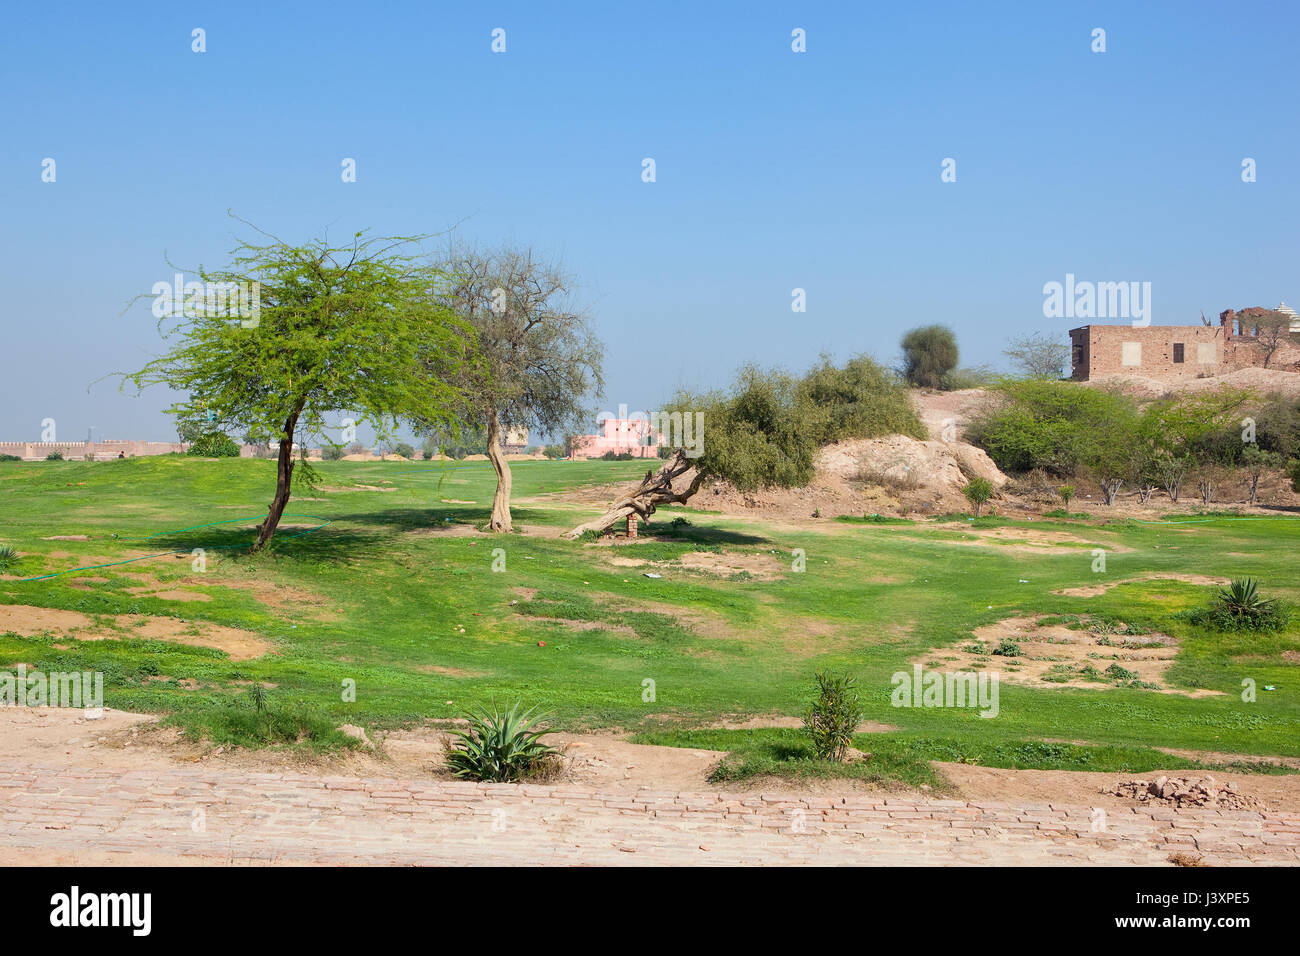 on top of bhatner fort complex in hanumangarh rajasthan with acacia trees restoration work and a hindu temple under a blue sky in springtime Stock Photo